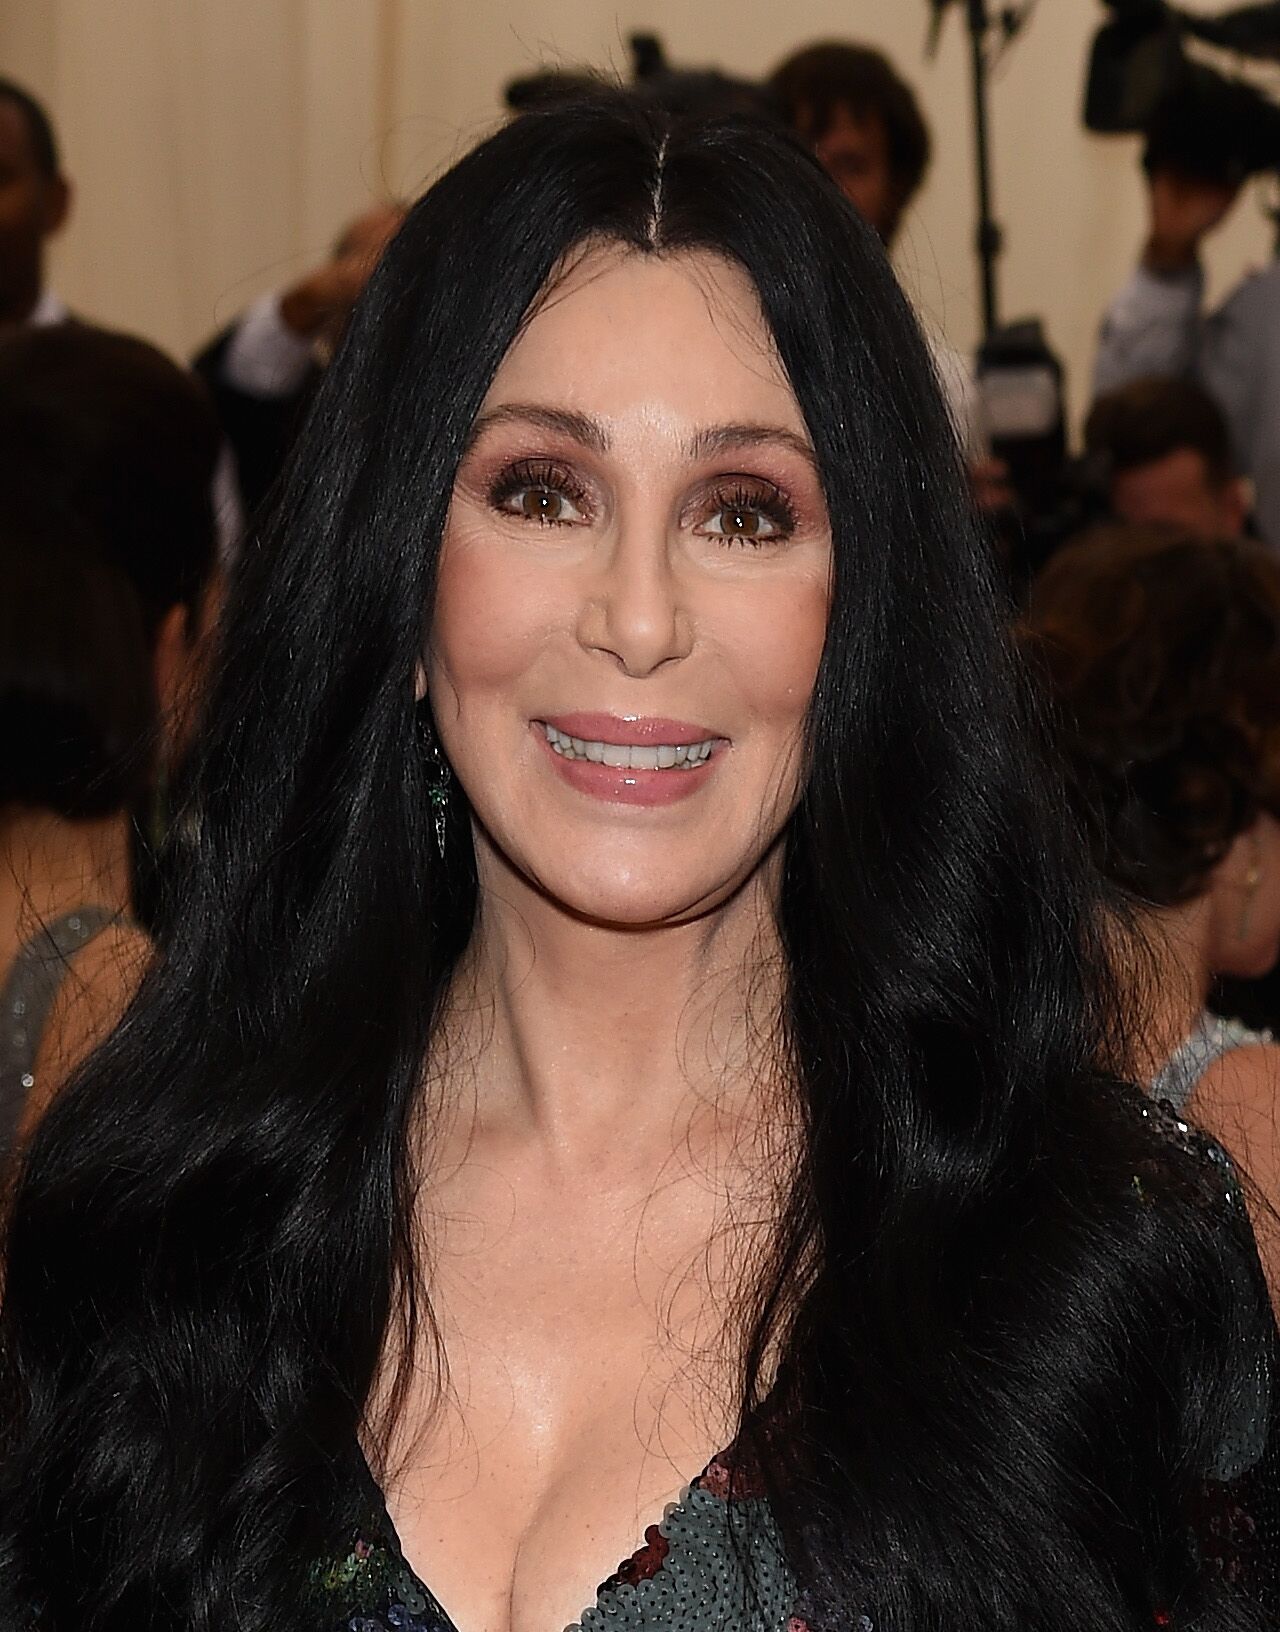 Cher attends the "China: Through The Looking Glass" Costume Institute Benefit Gala at the Metropolitan Museum of Art  | Getty Images